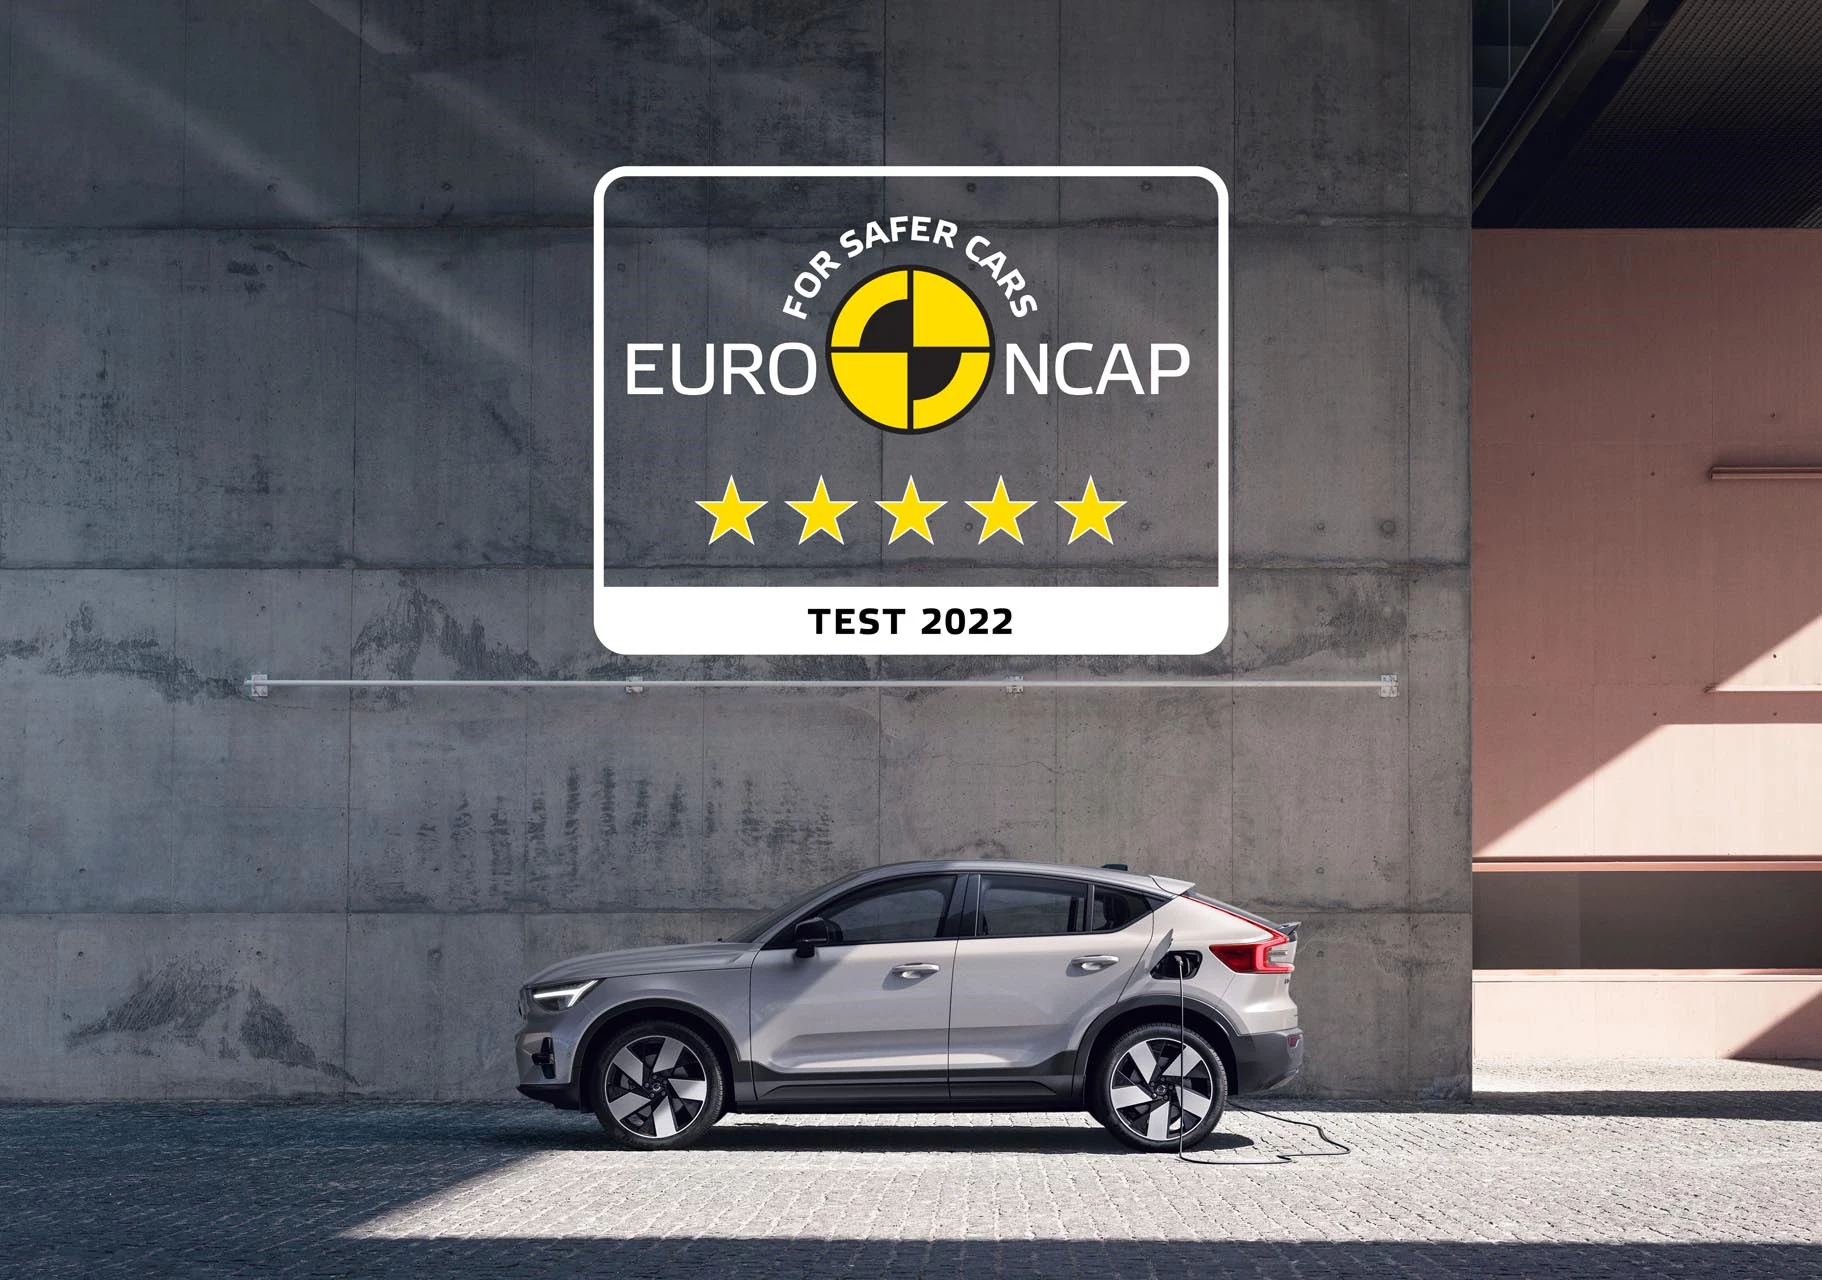 301589 Fully Electric C40 Recharge Continues Volvo Cars Five Star Streak In Euro